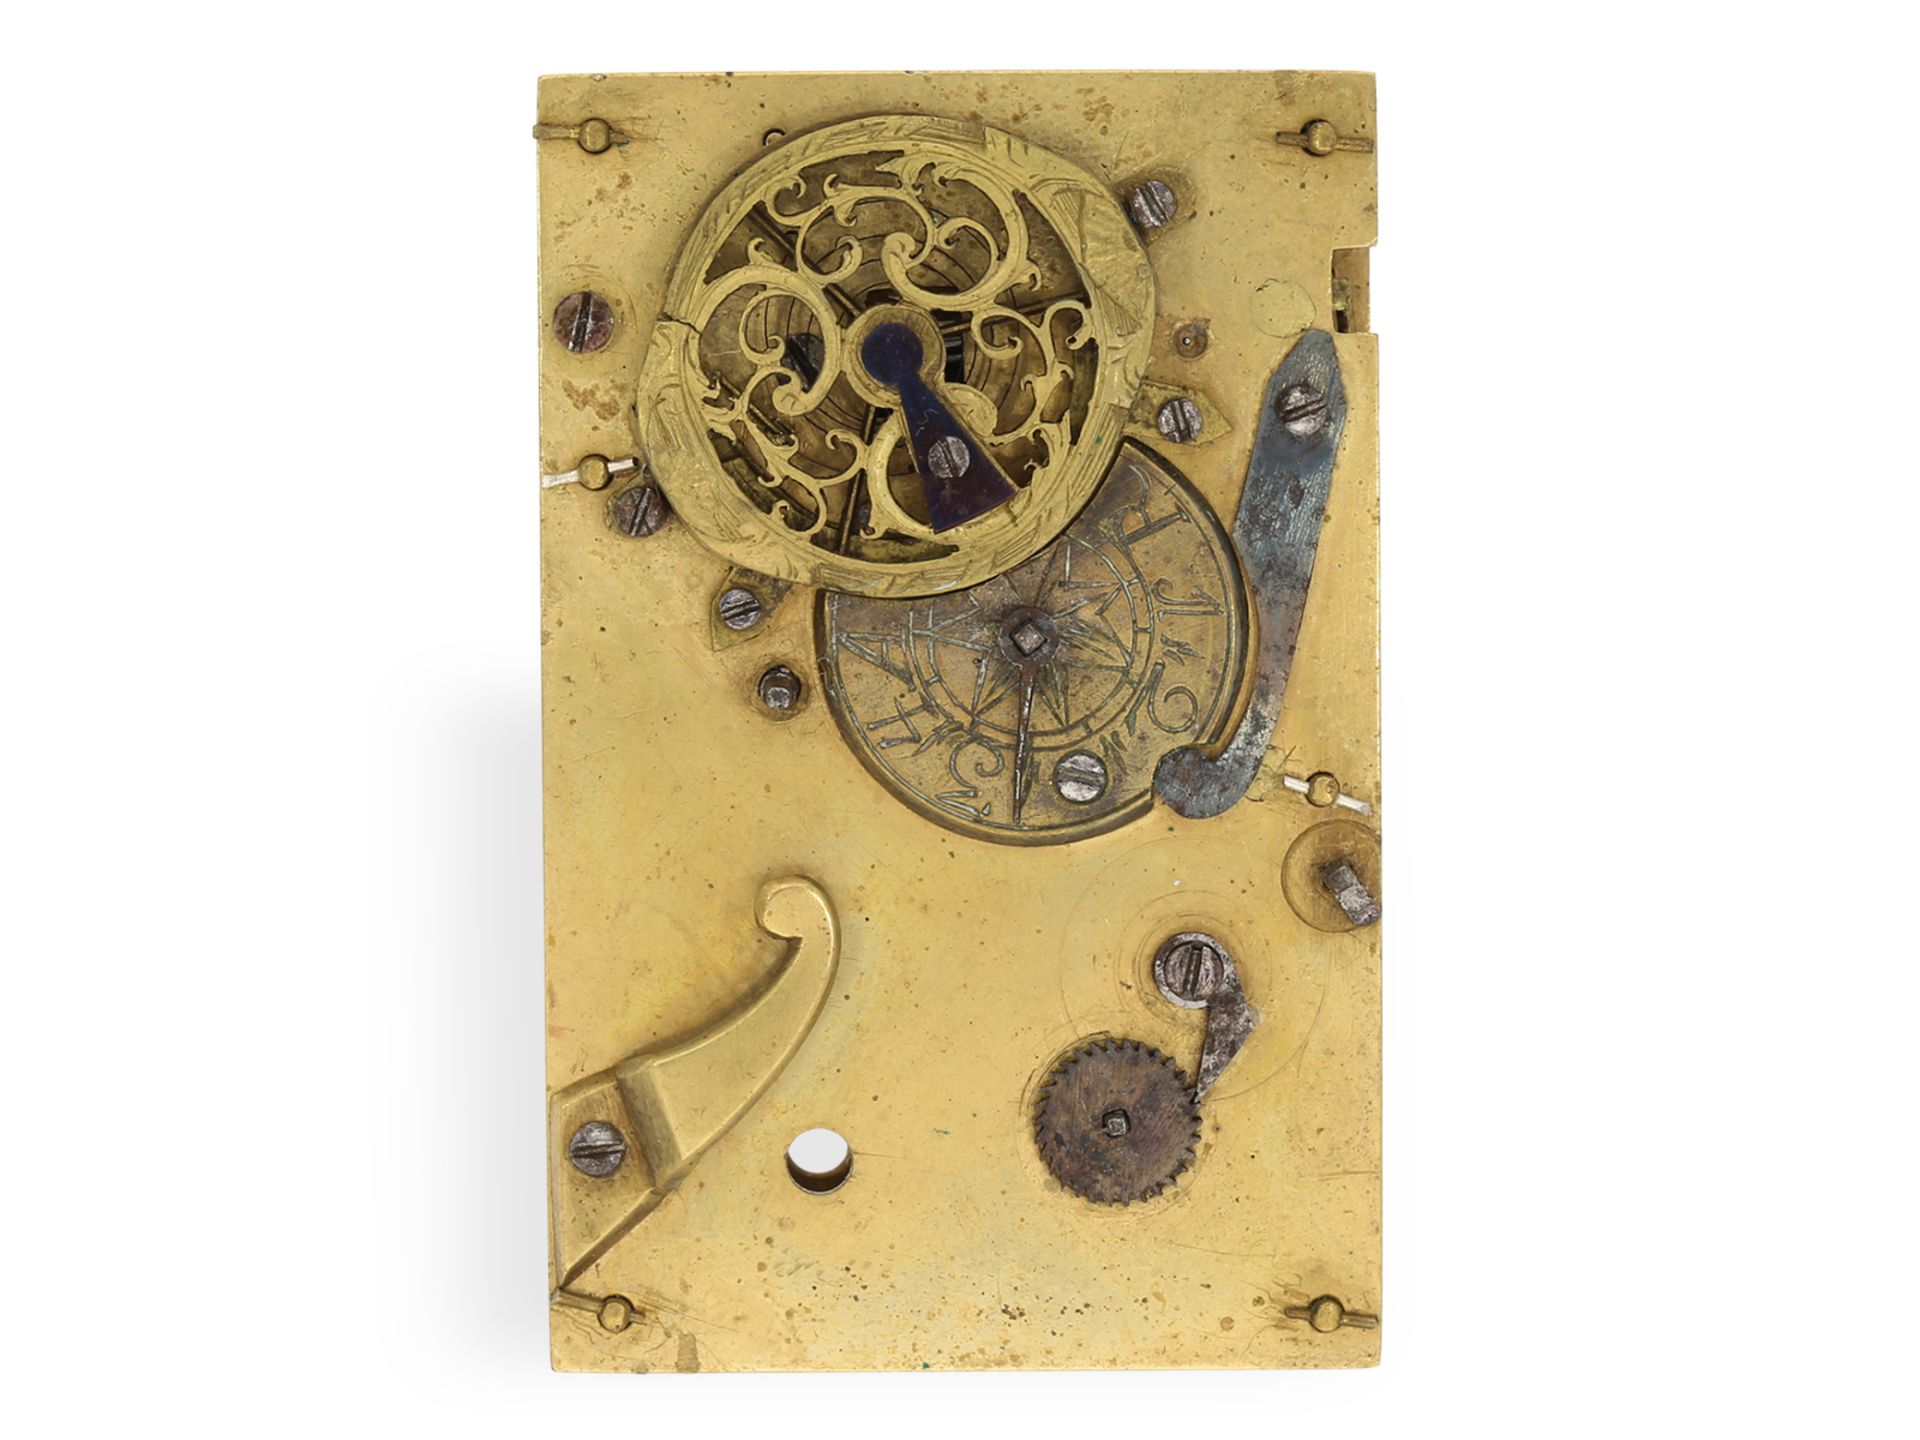 Pocket watch: extremely rare verge watch in book form, signed Steiger, probably from southern German - Image 7 of 7